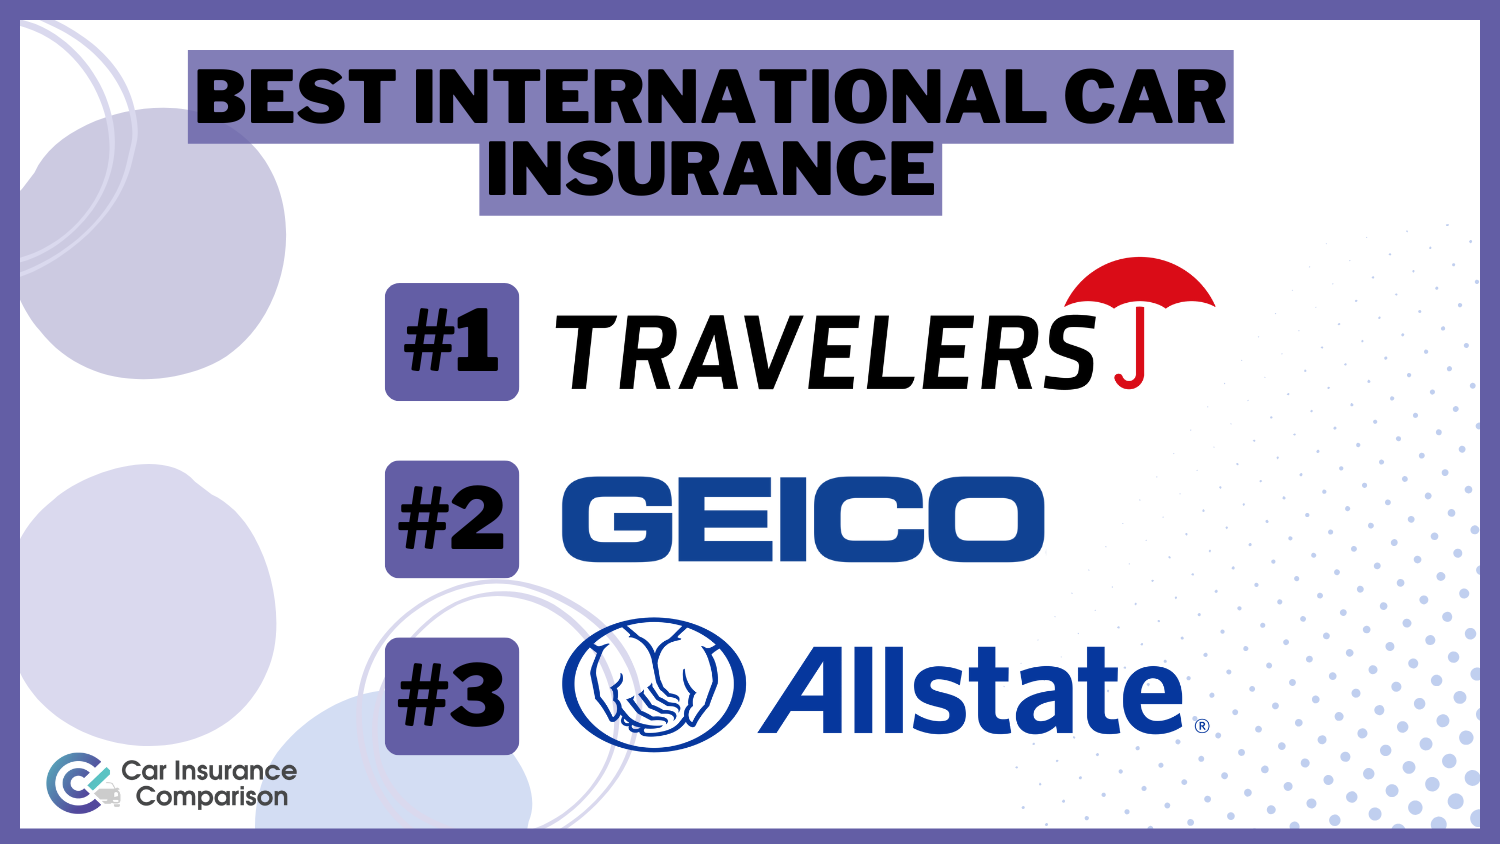 Best International Car Insurance: Travelers, Geico, and Allstate.